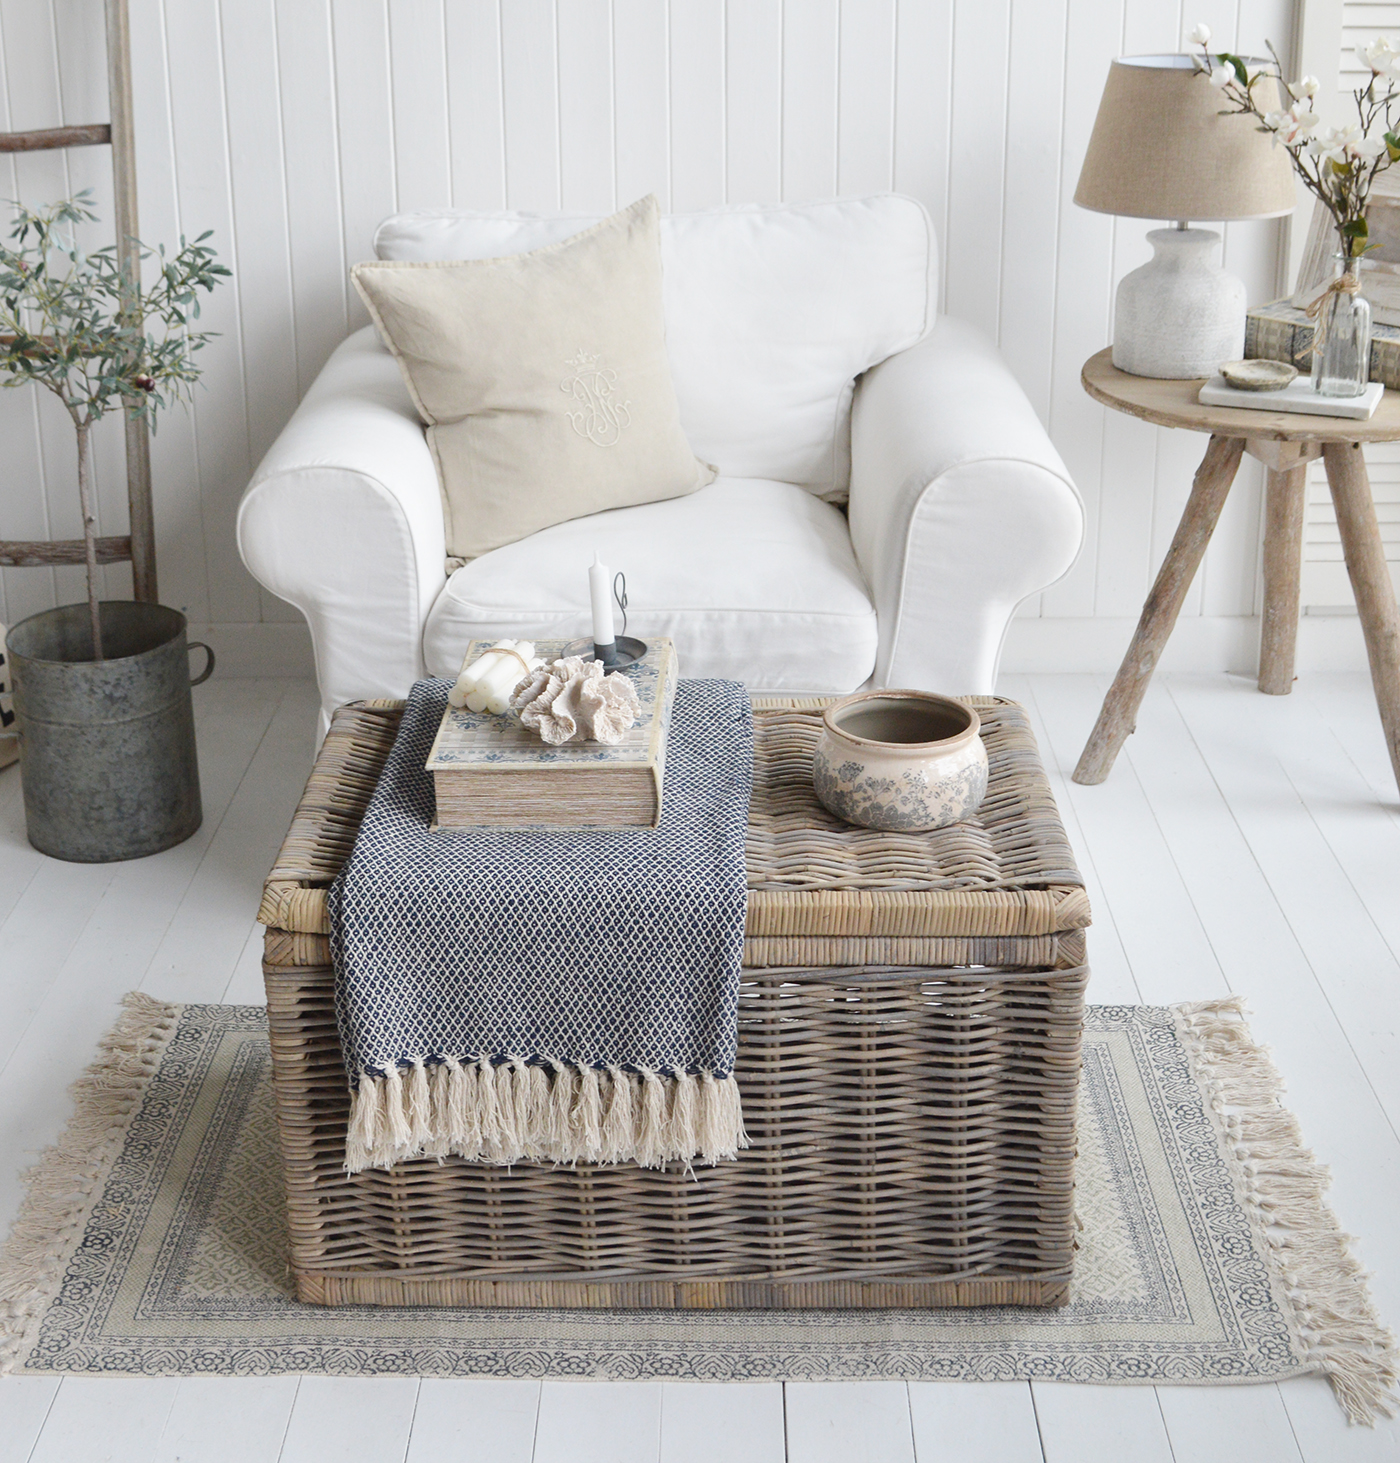 Wicker storage coffee table for New Engladn Interiors. Coastal, modern country and farmhouse furniture and home decor